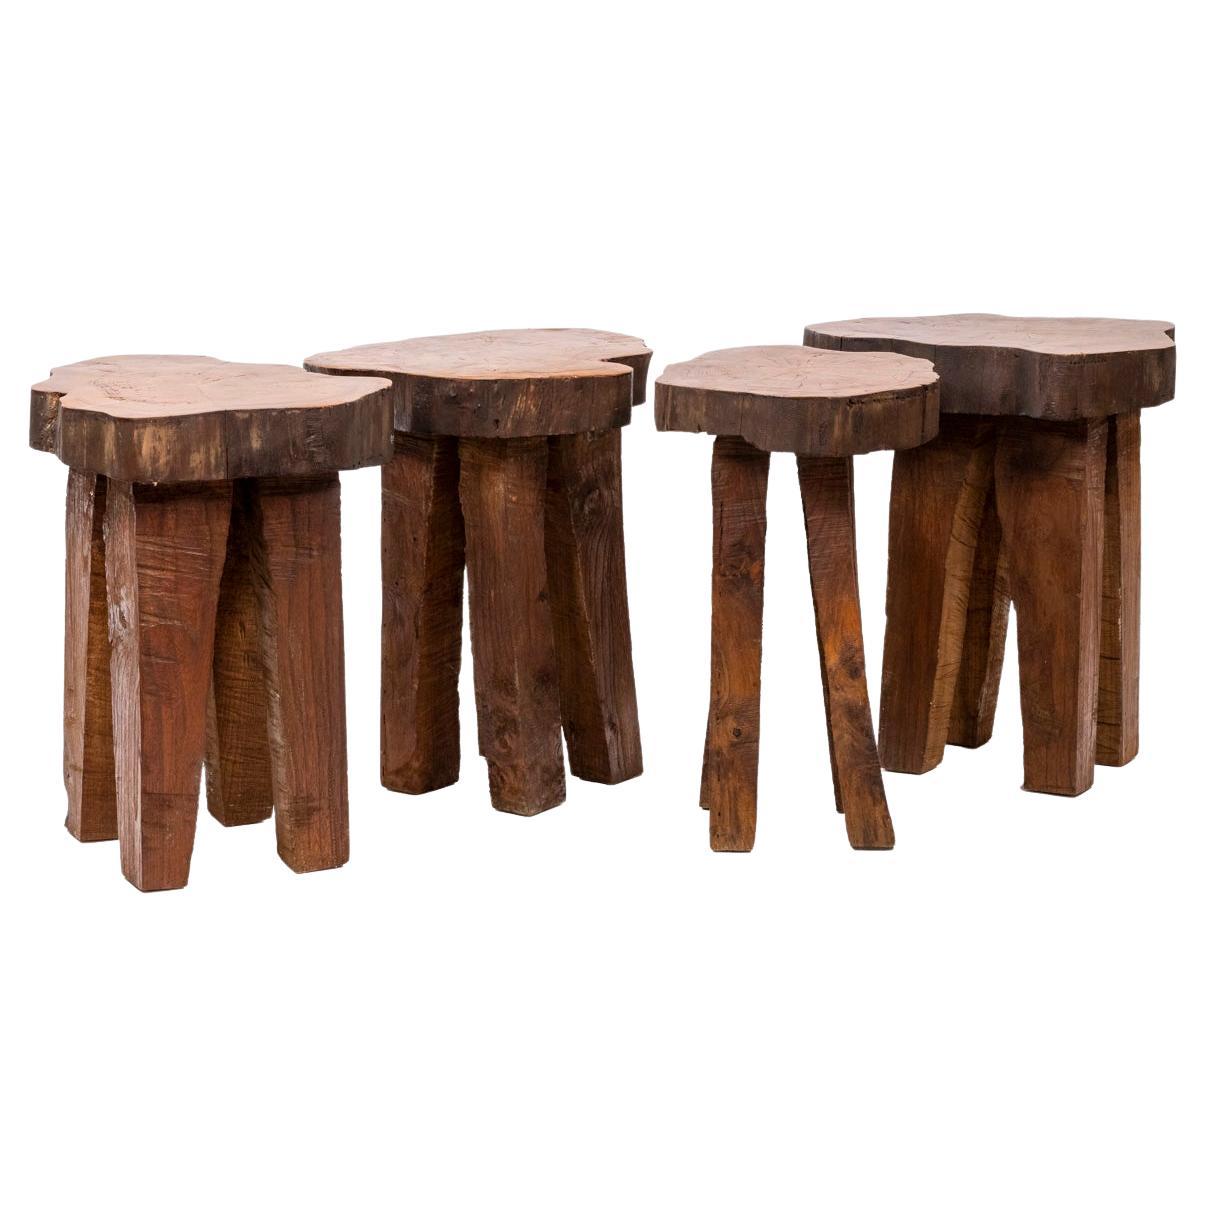 Set of Fours Stools, 1970s